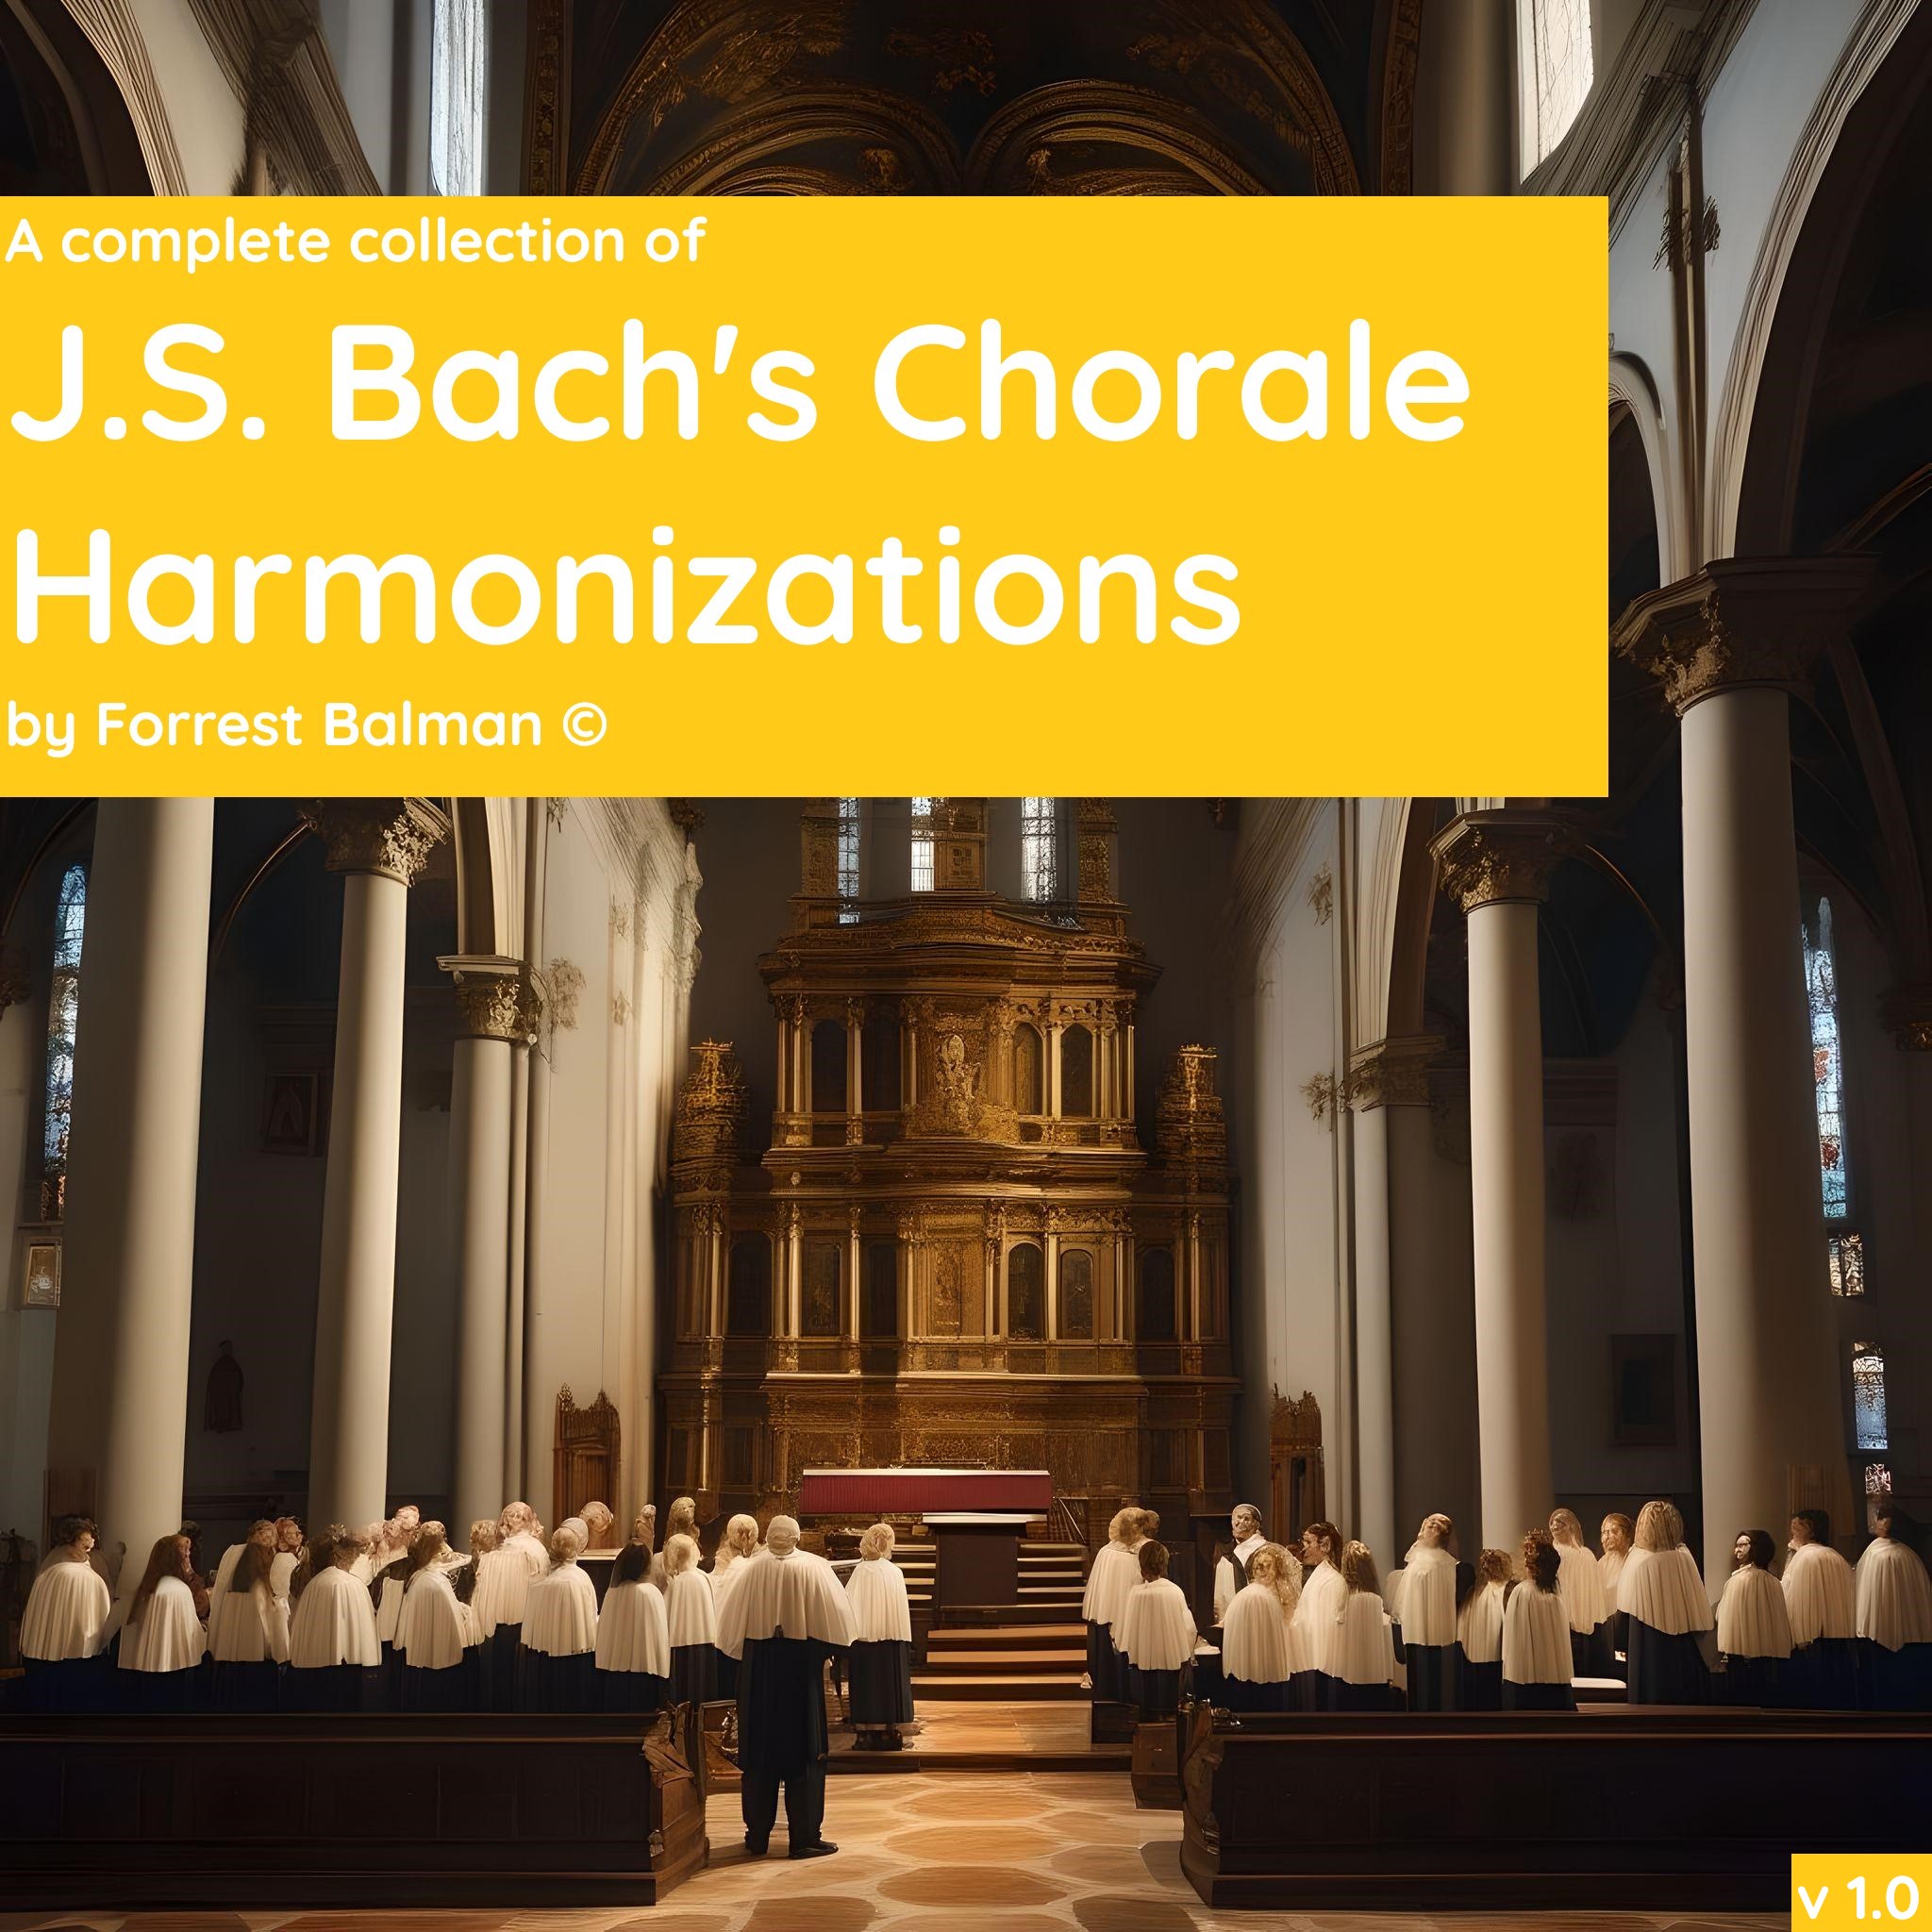 the cover of Forrest's Complete Collection of All of J.S. Bach's Chorale Harmonizations